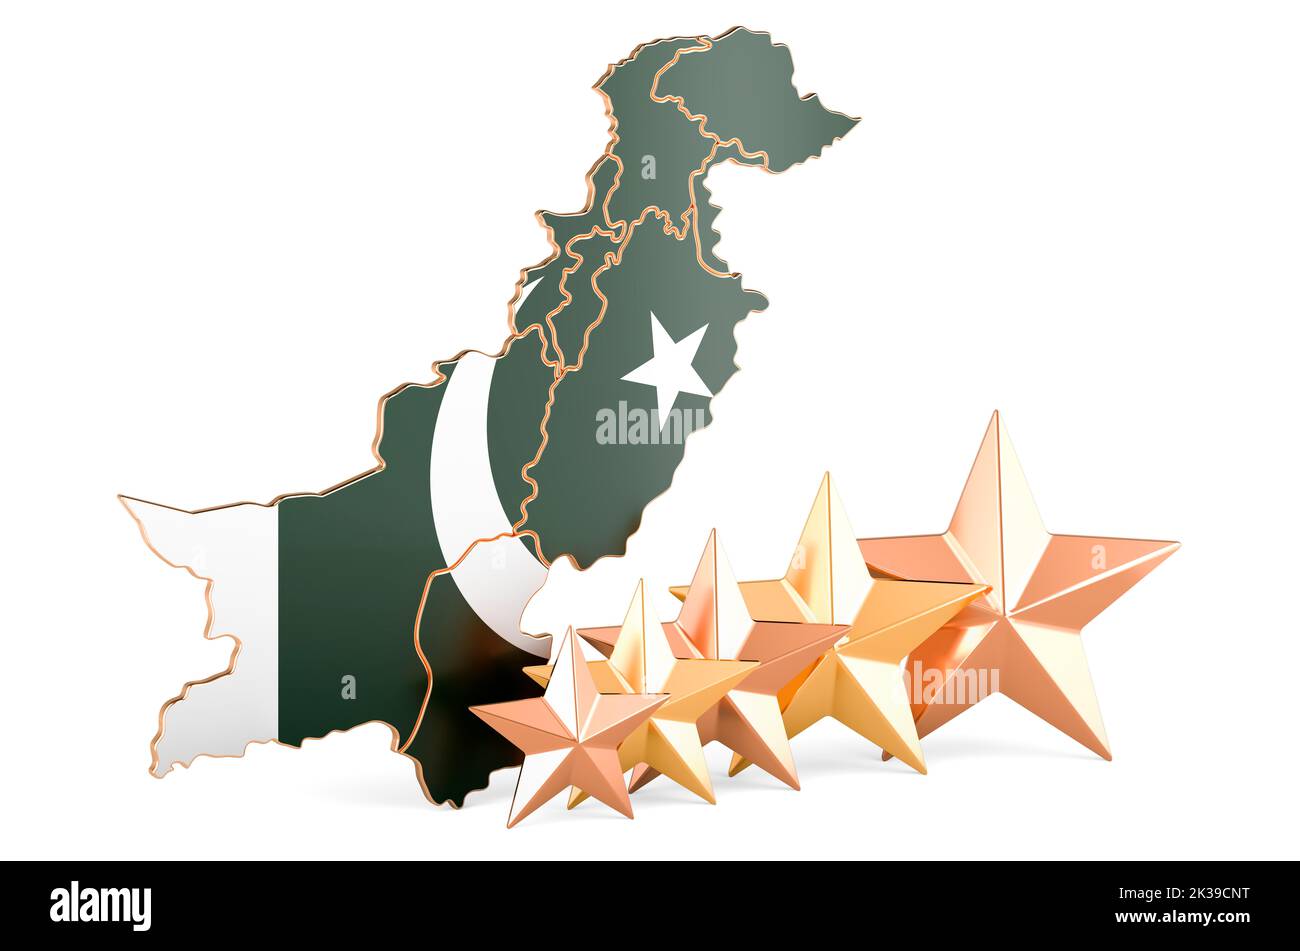 Pakistani map with five stars. Rating, quality, service in Pakistan. 3D rendering isolated on white background Stock Photo